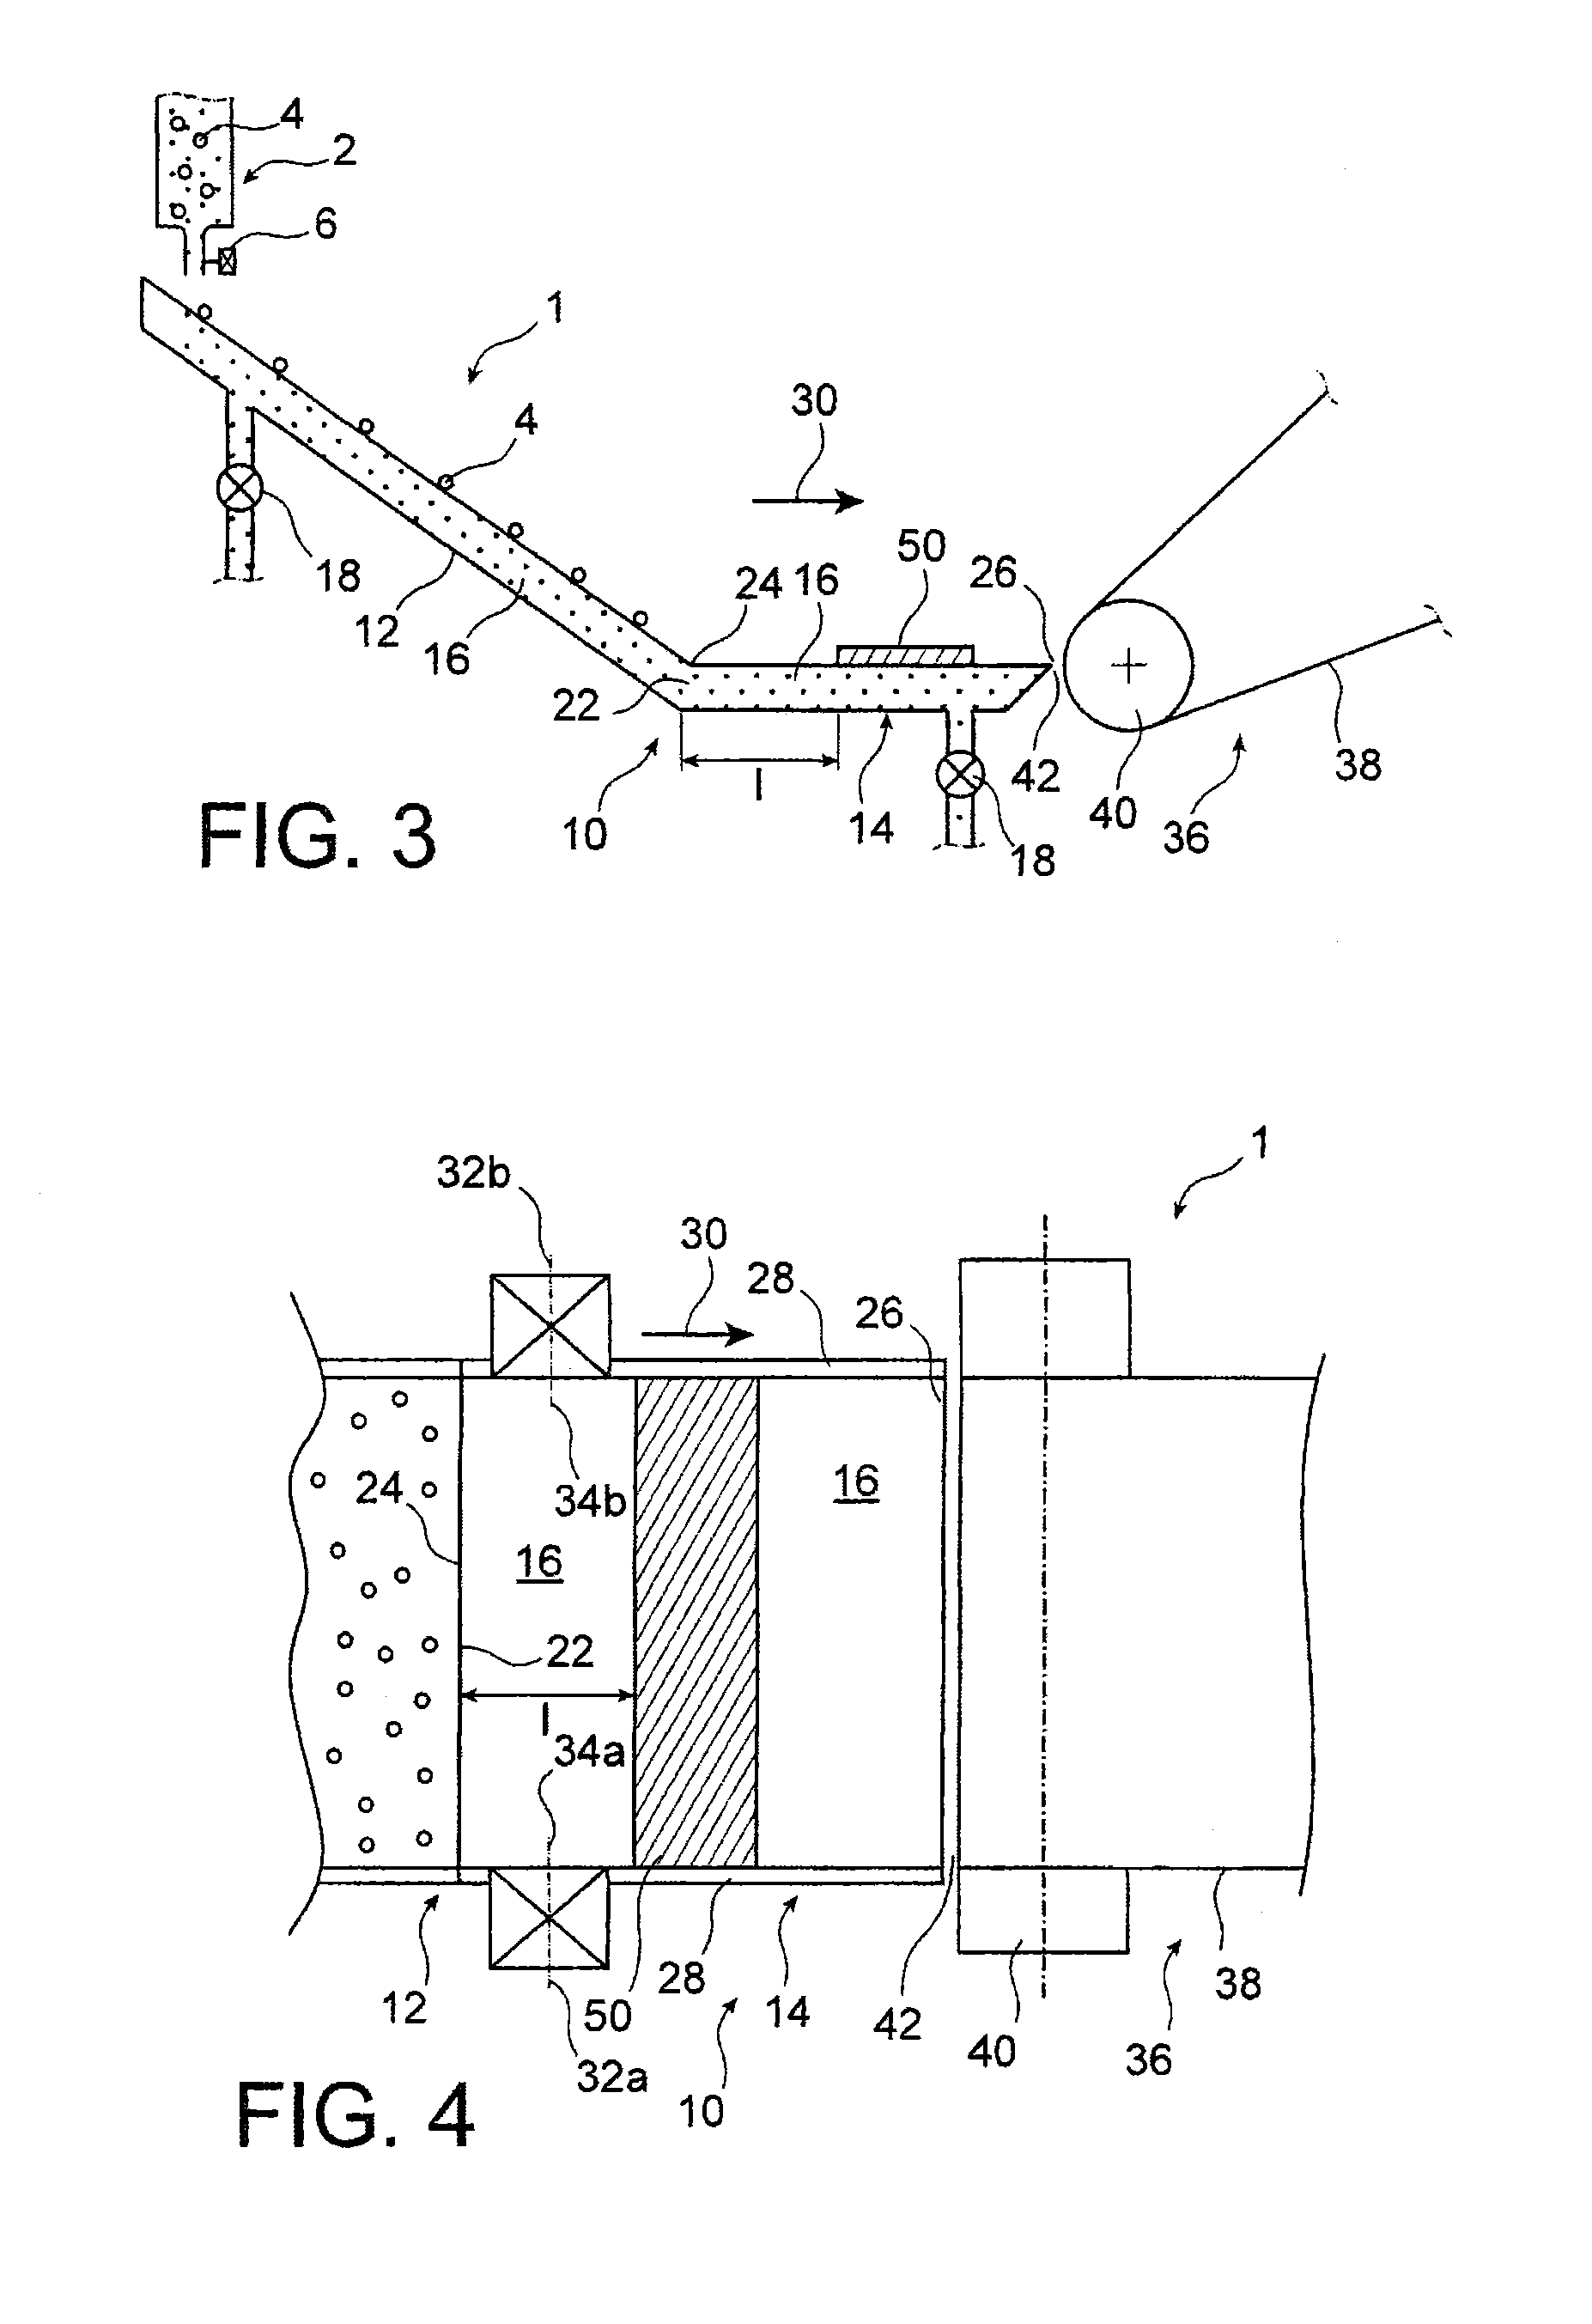 Facility and method for depositing a film of ordered particles onto a moving substrate